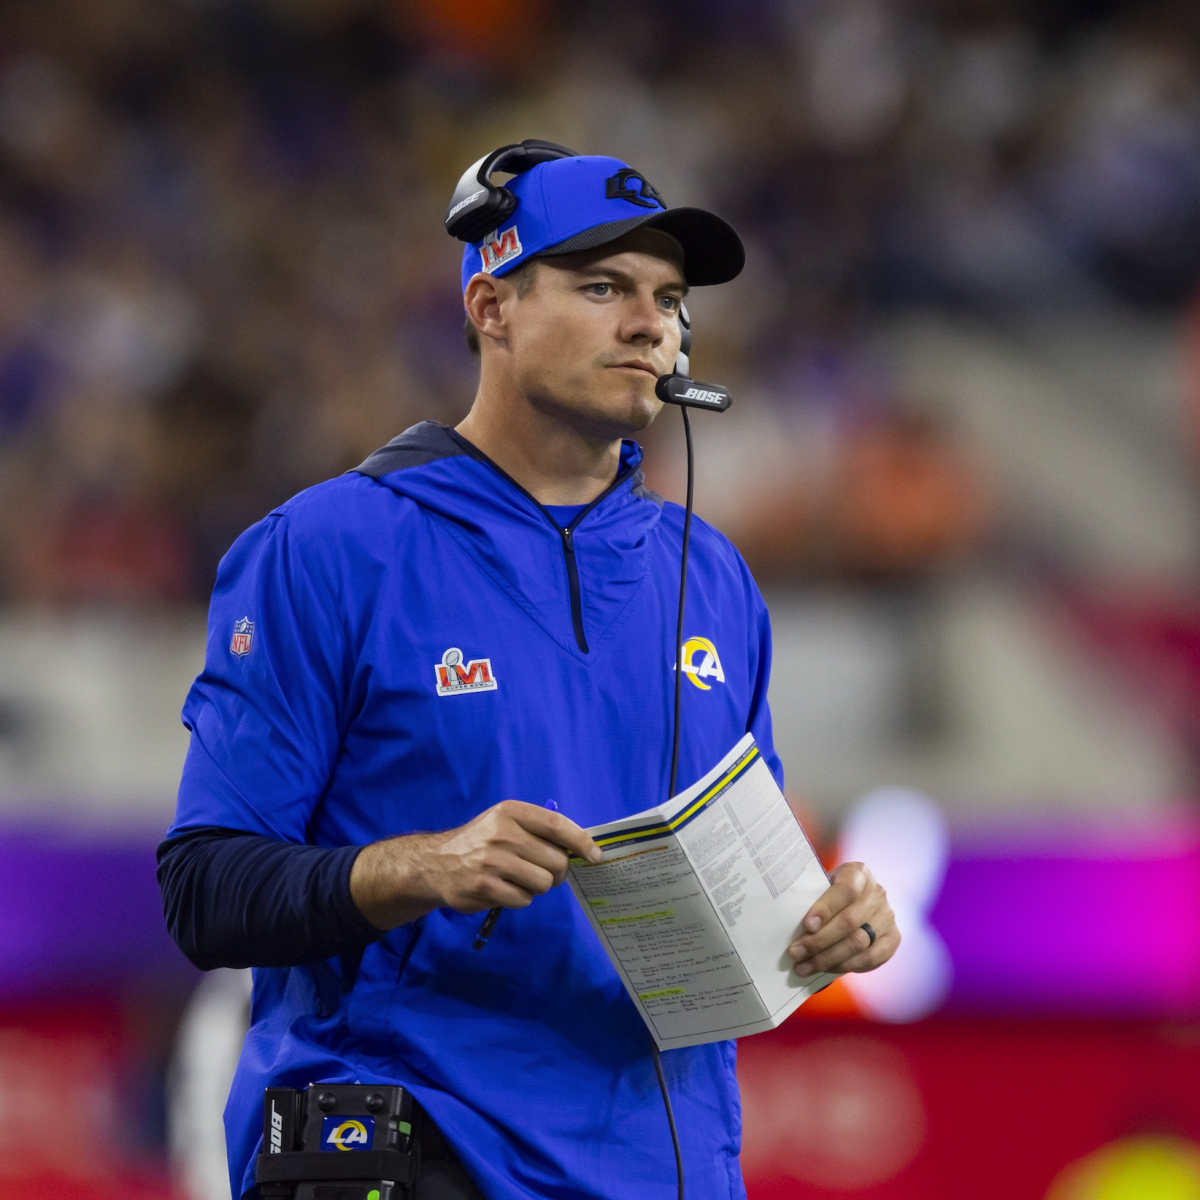 Kevin O'Connell: Vikings confirm Rams OC as new head coach - AS USA